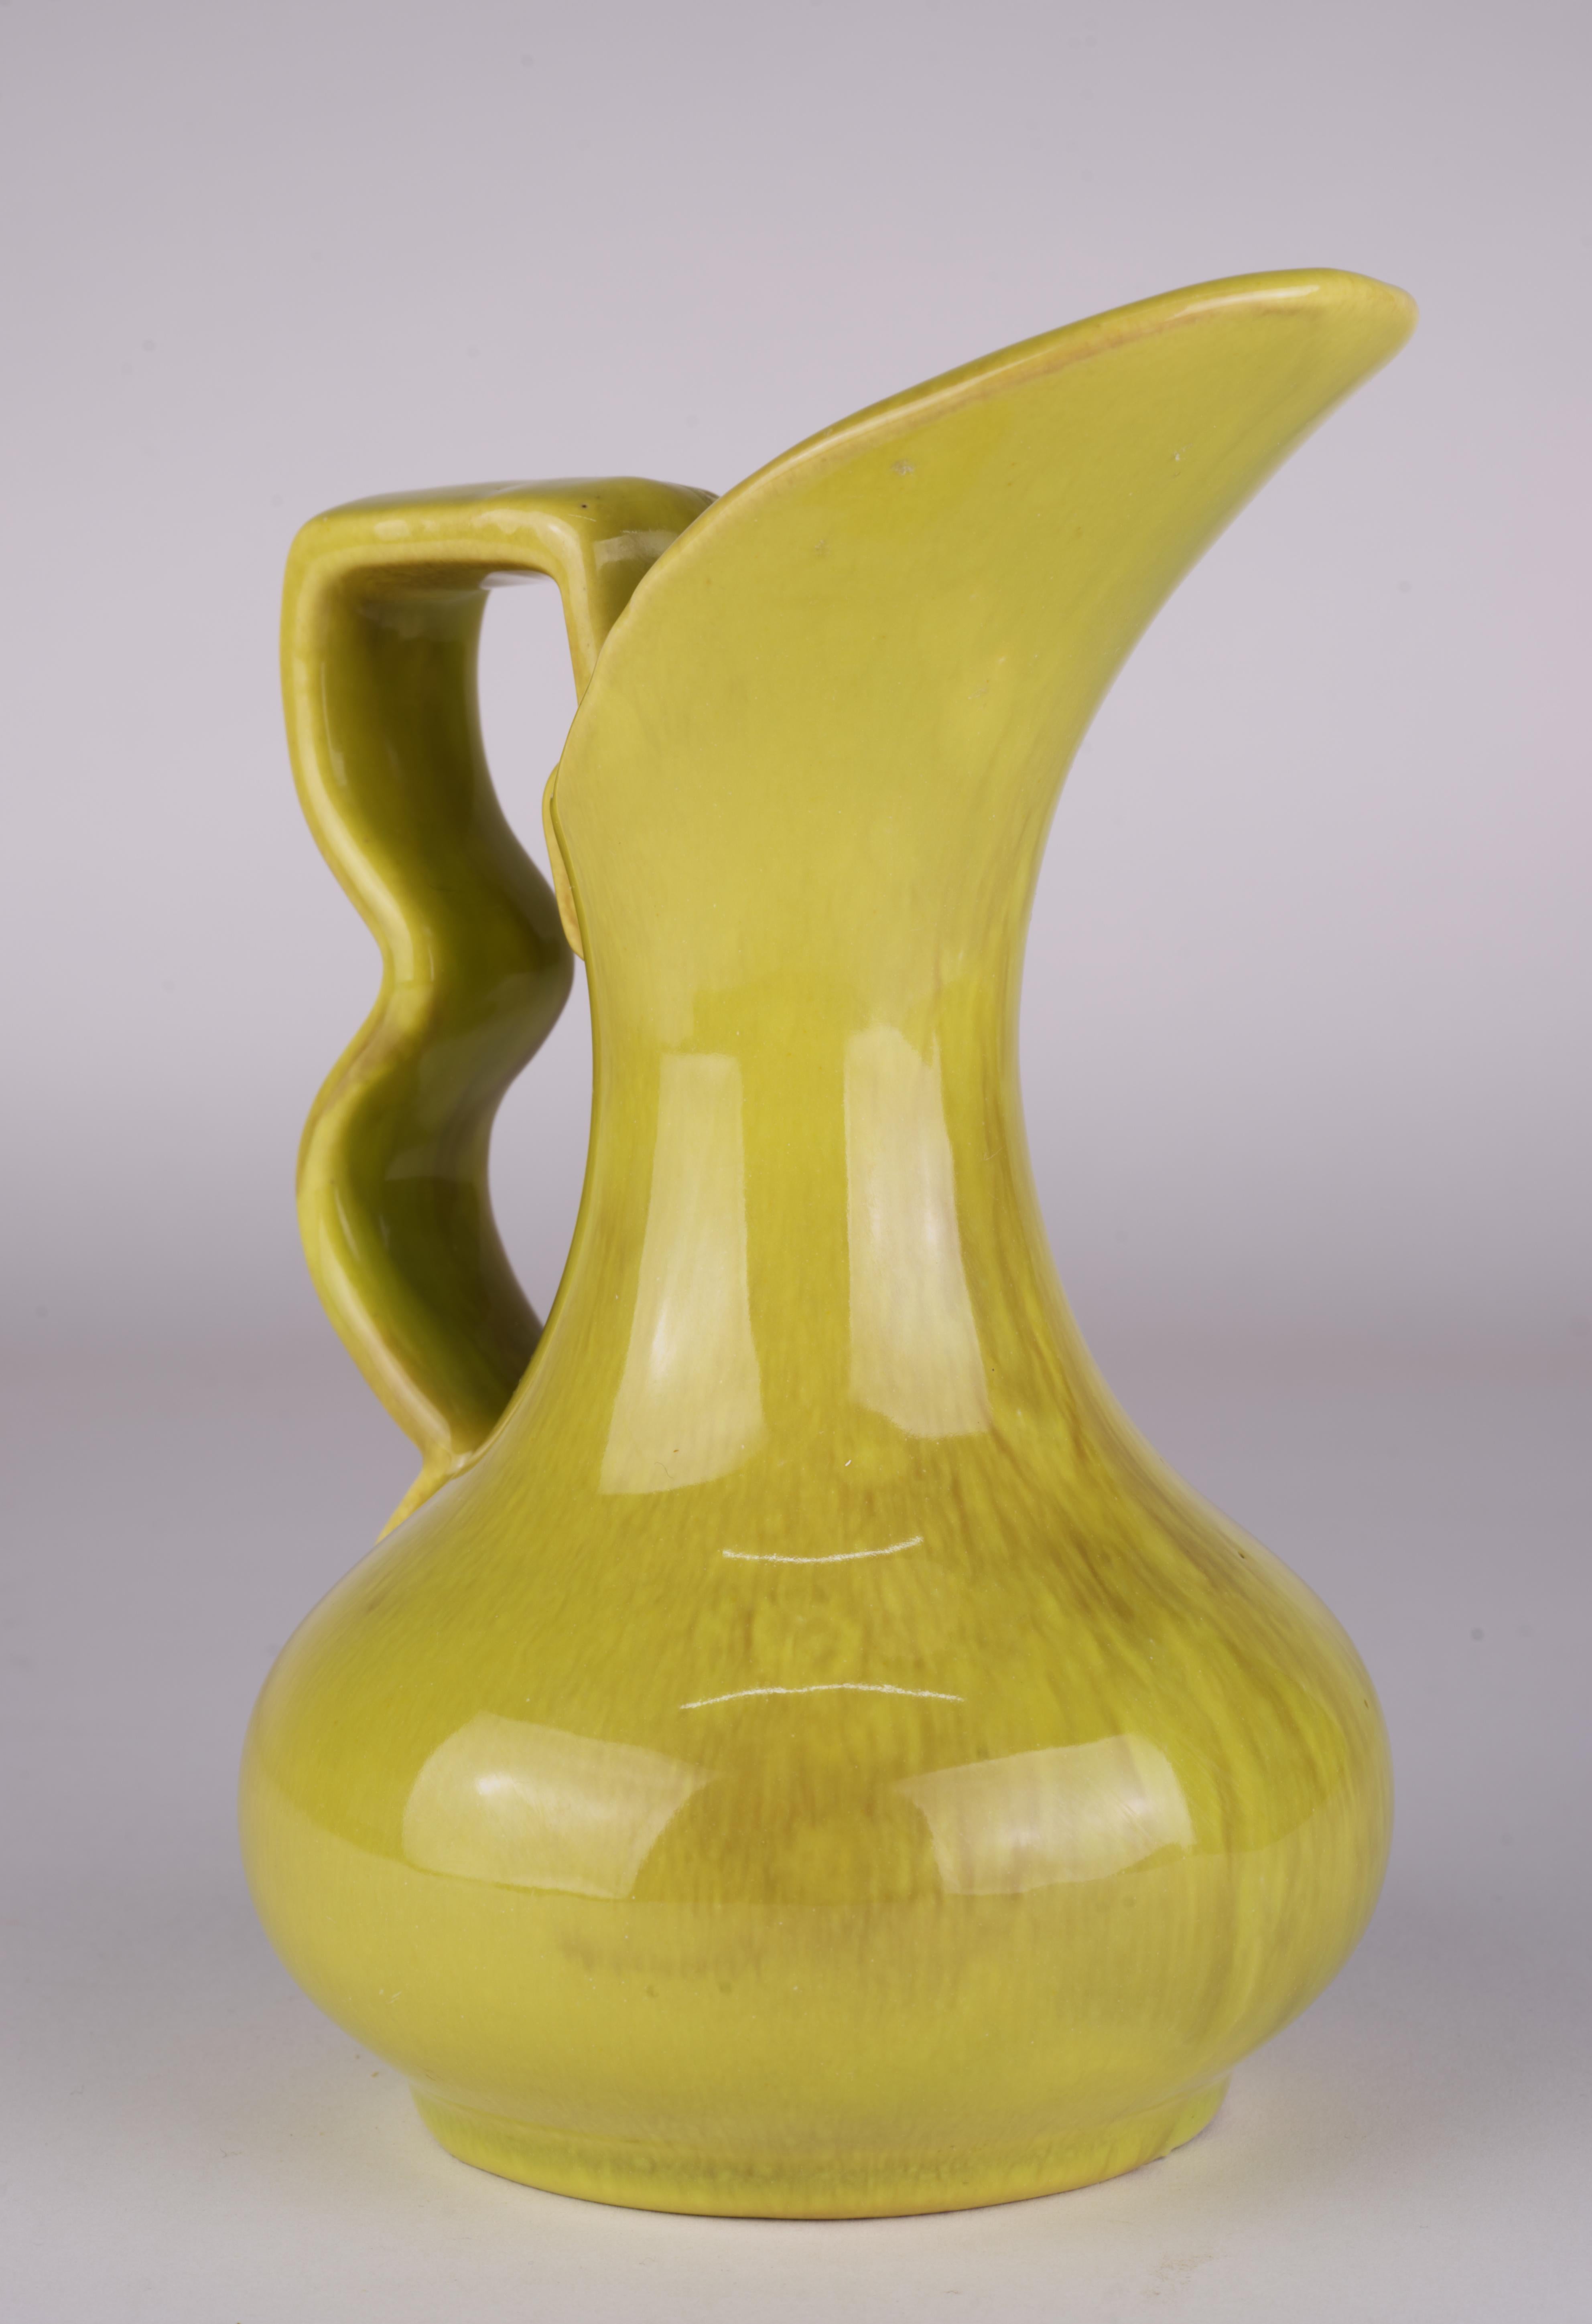 Mid-Century Modern Gonder Pottery Bud Vase Ewer in Chartreuse Drip Glaze 1940s-1950s For Sale